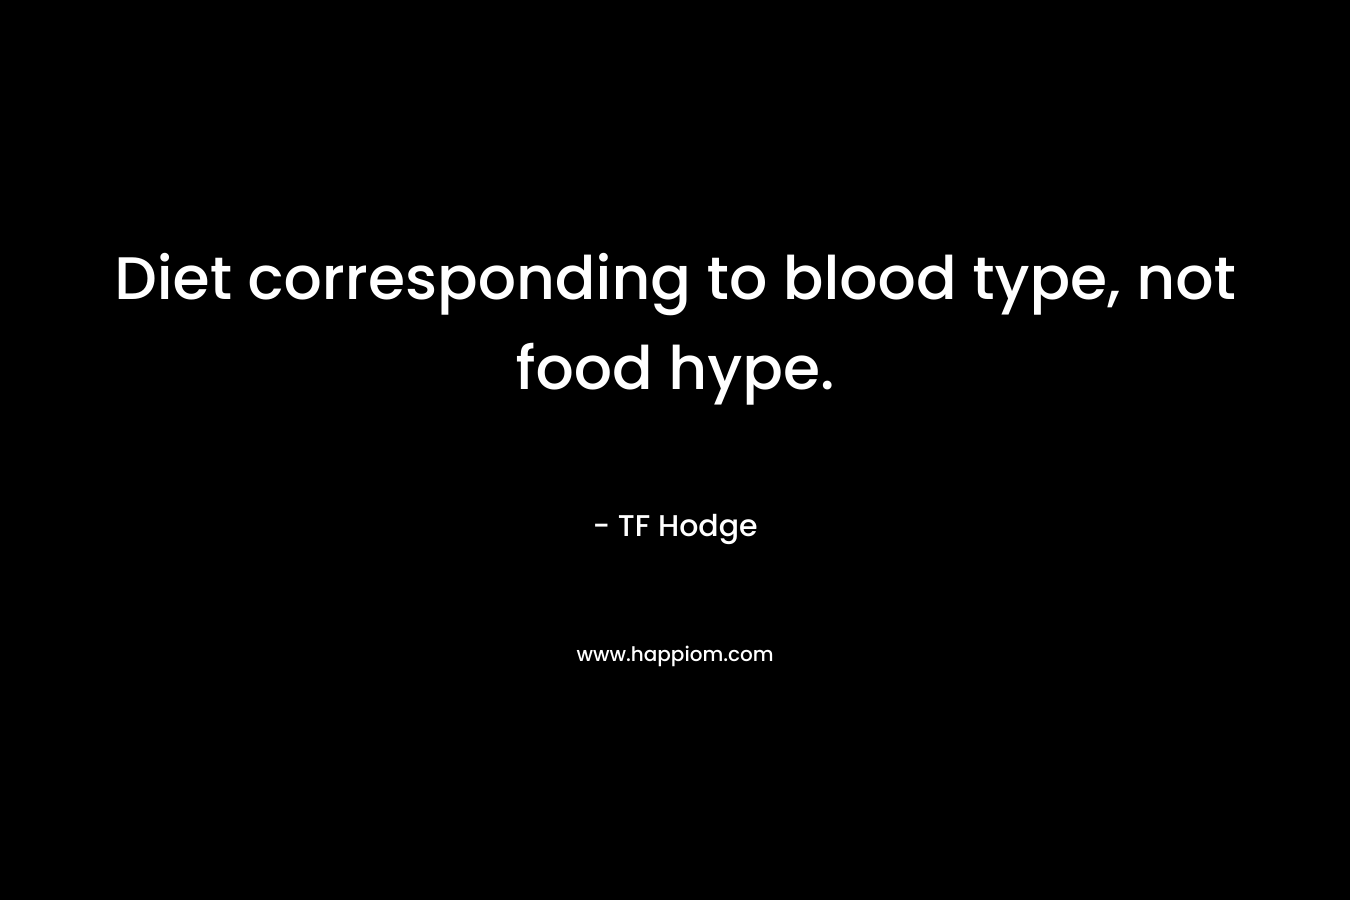 Diet corresponding to blood type, not food hype.